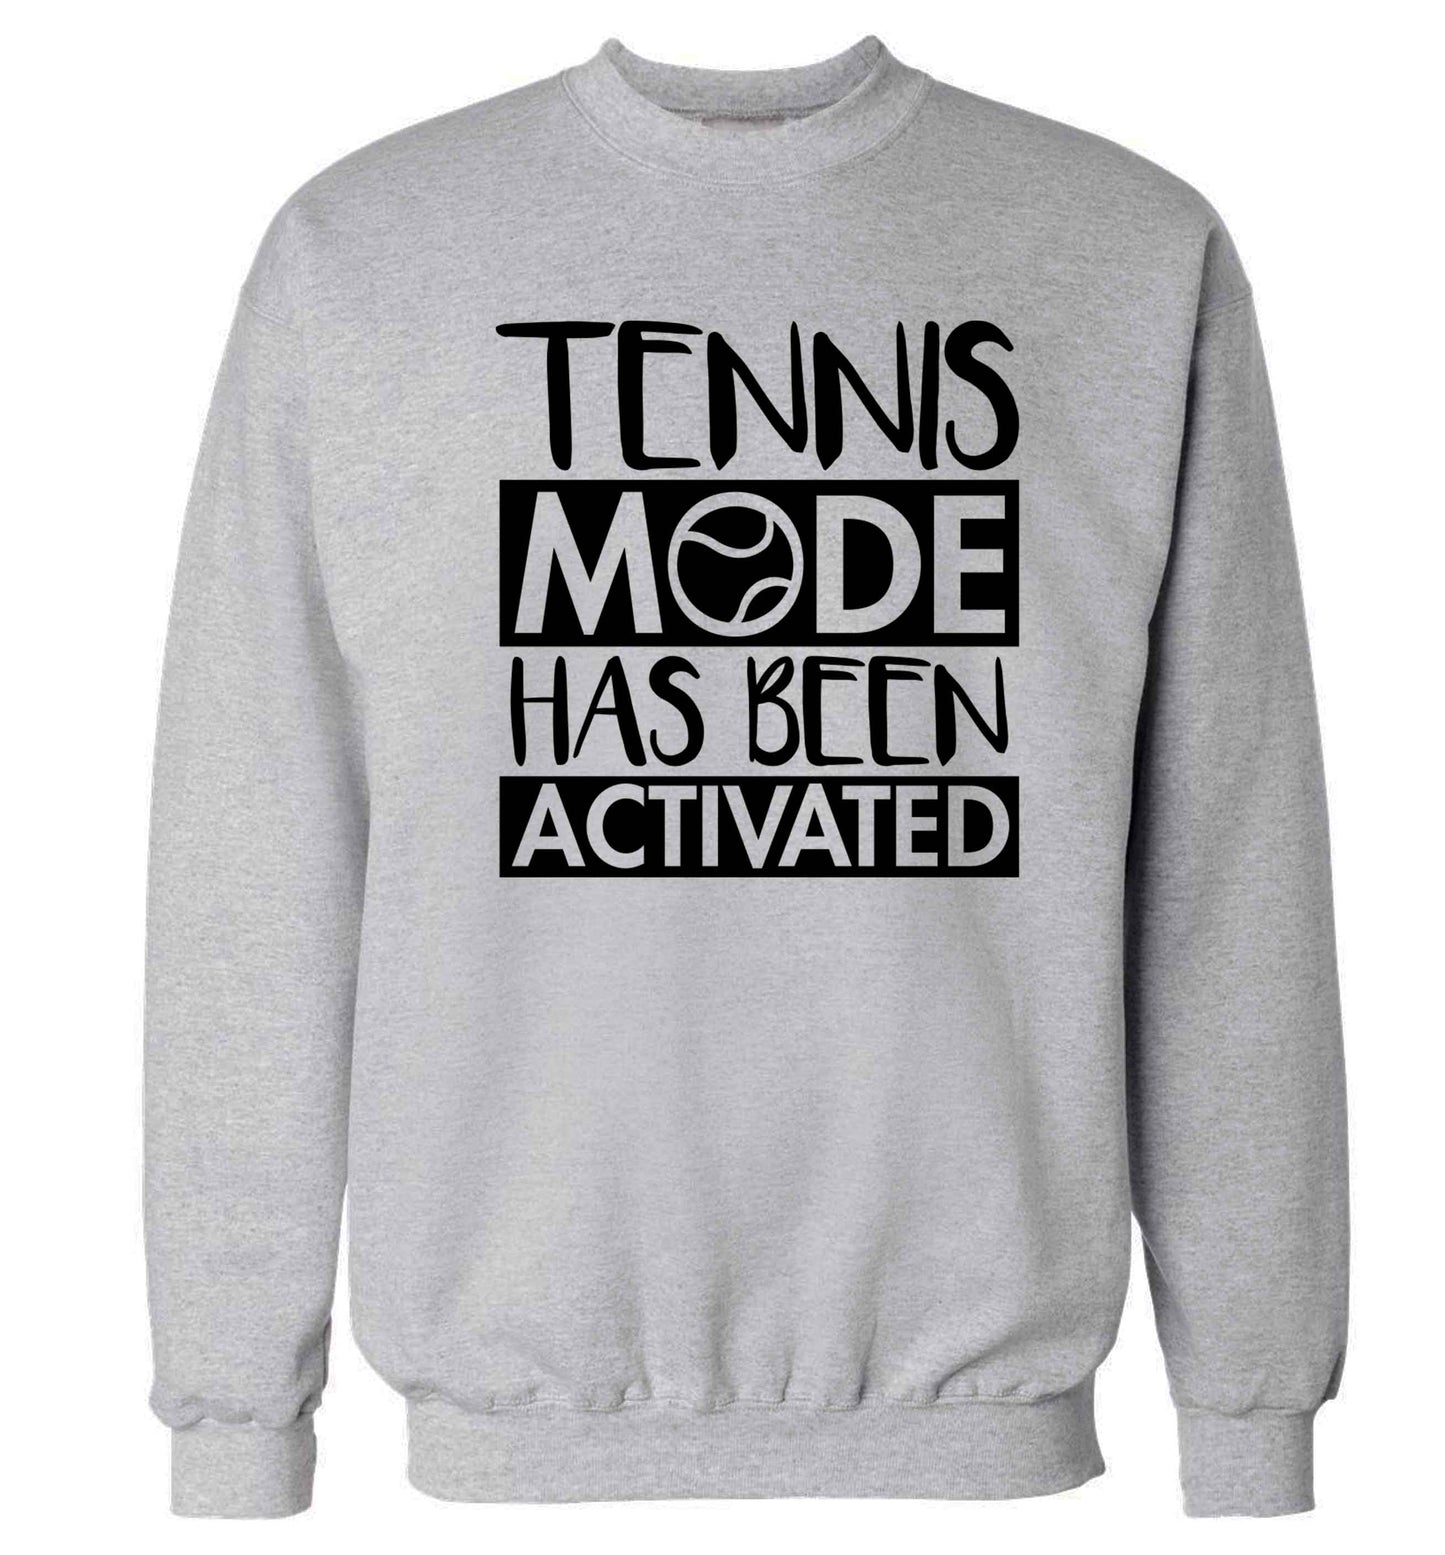 Tennis mode has been activated Adult's unisex grey Sweater 2XL